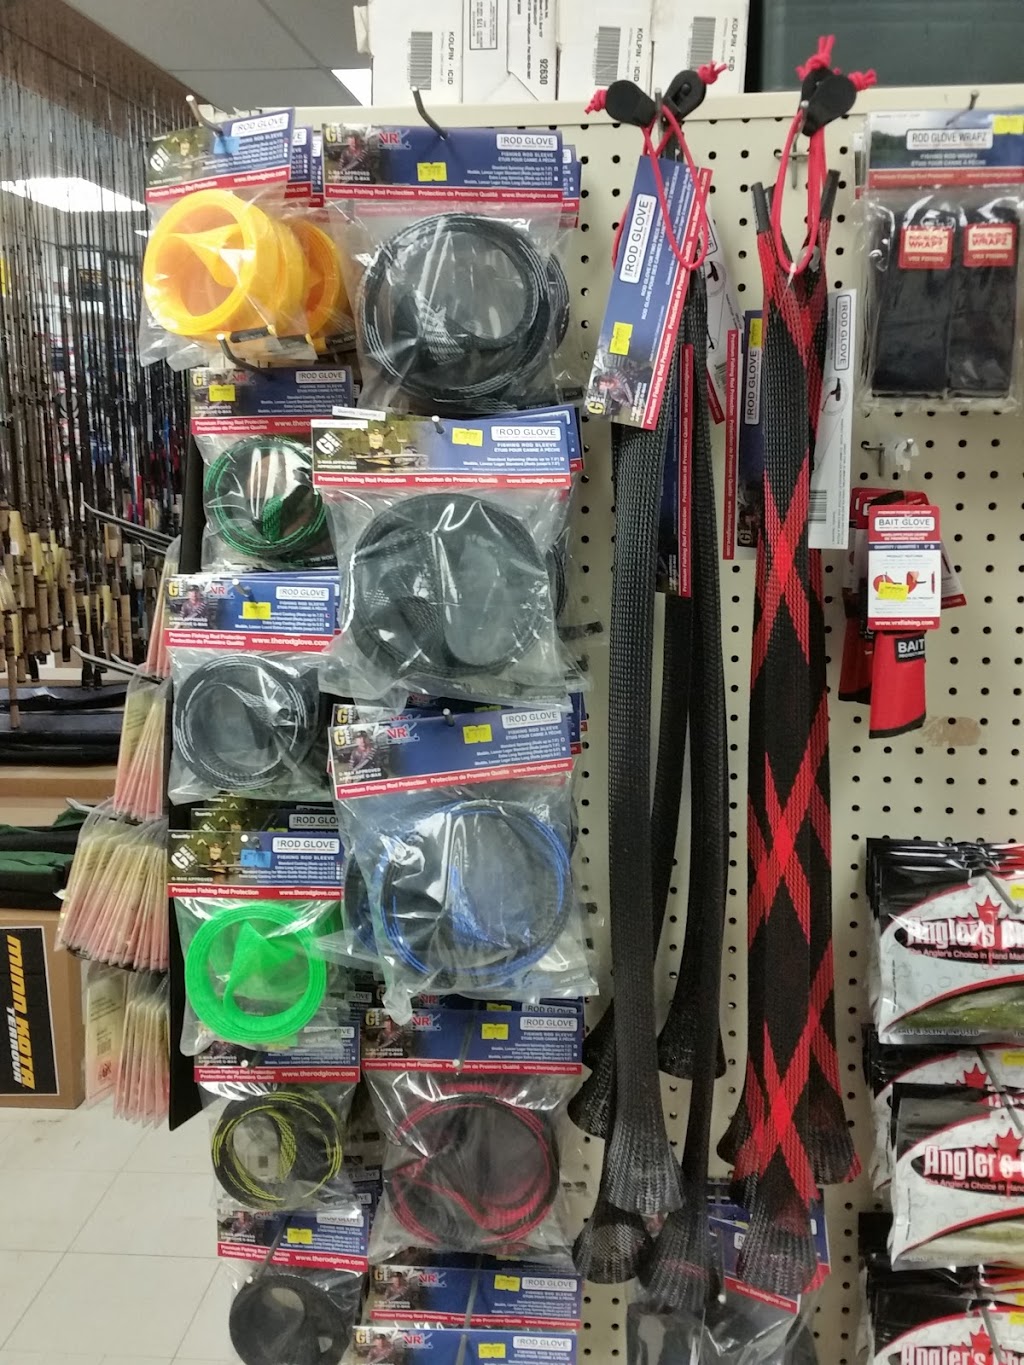 D & R Sporting Goods | 485 Memorial Ave, Thunder Bay, ON P7B 3Y6, Canada | Phone: (807) 345-3323